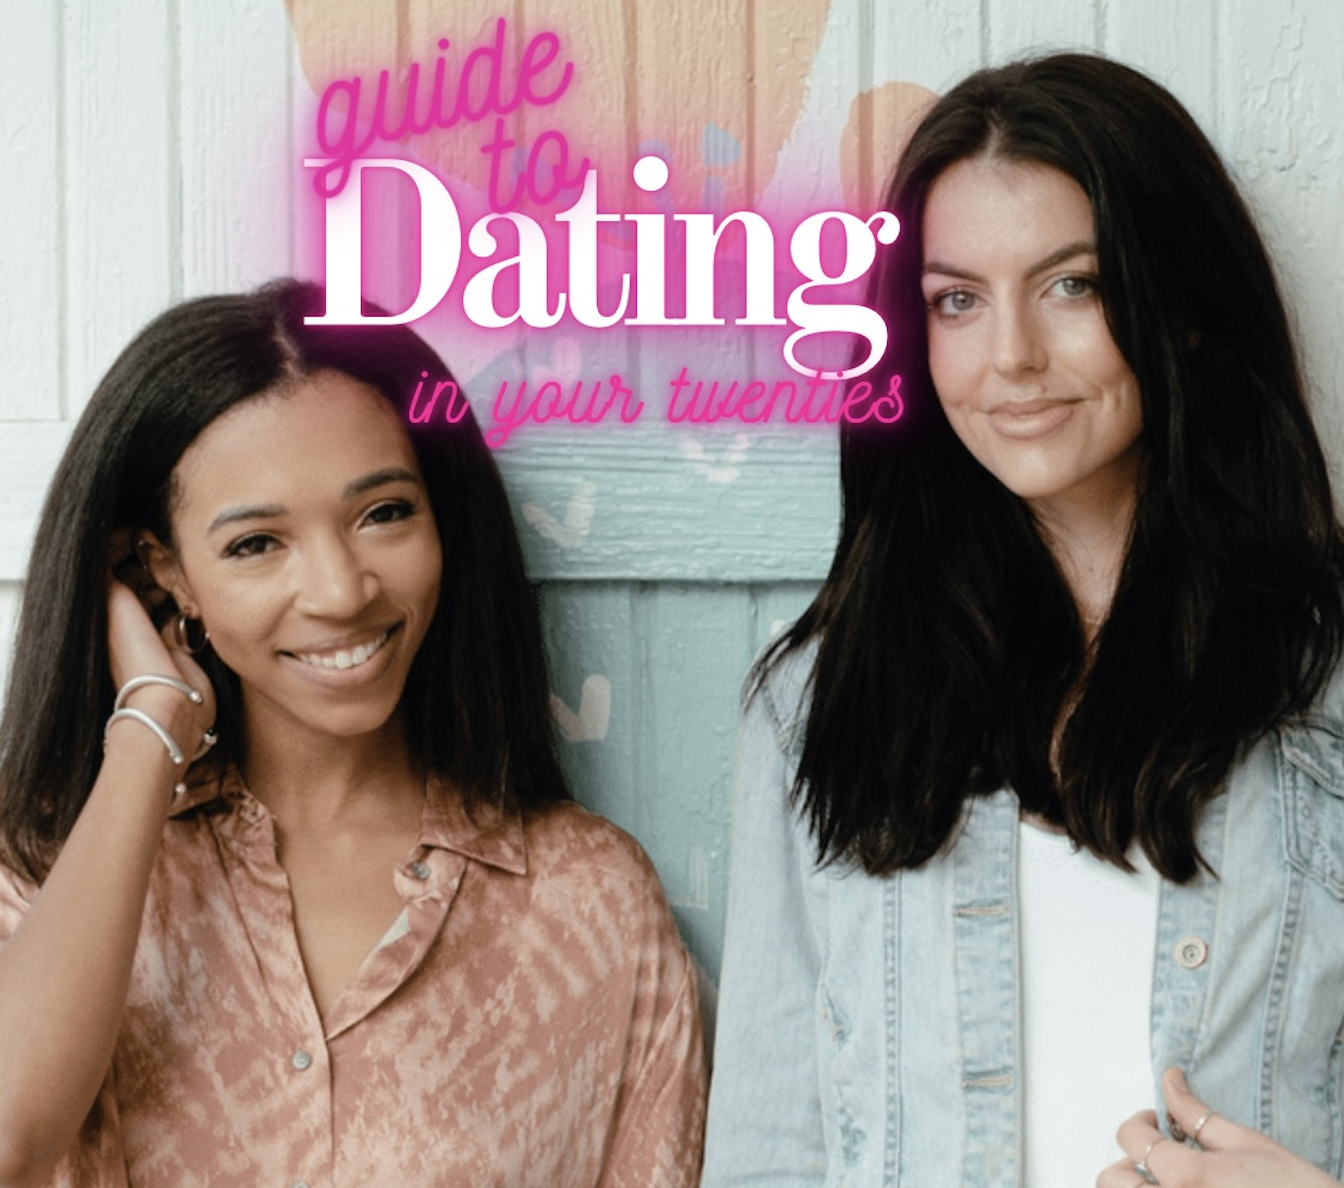 Image of Sara and Maddie with word art written over that says guide to dating in your twenties